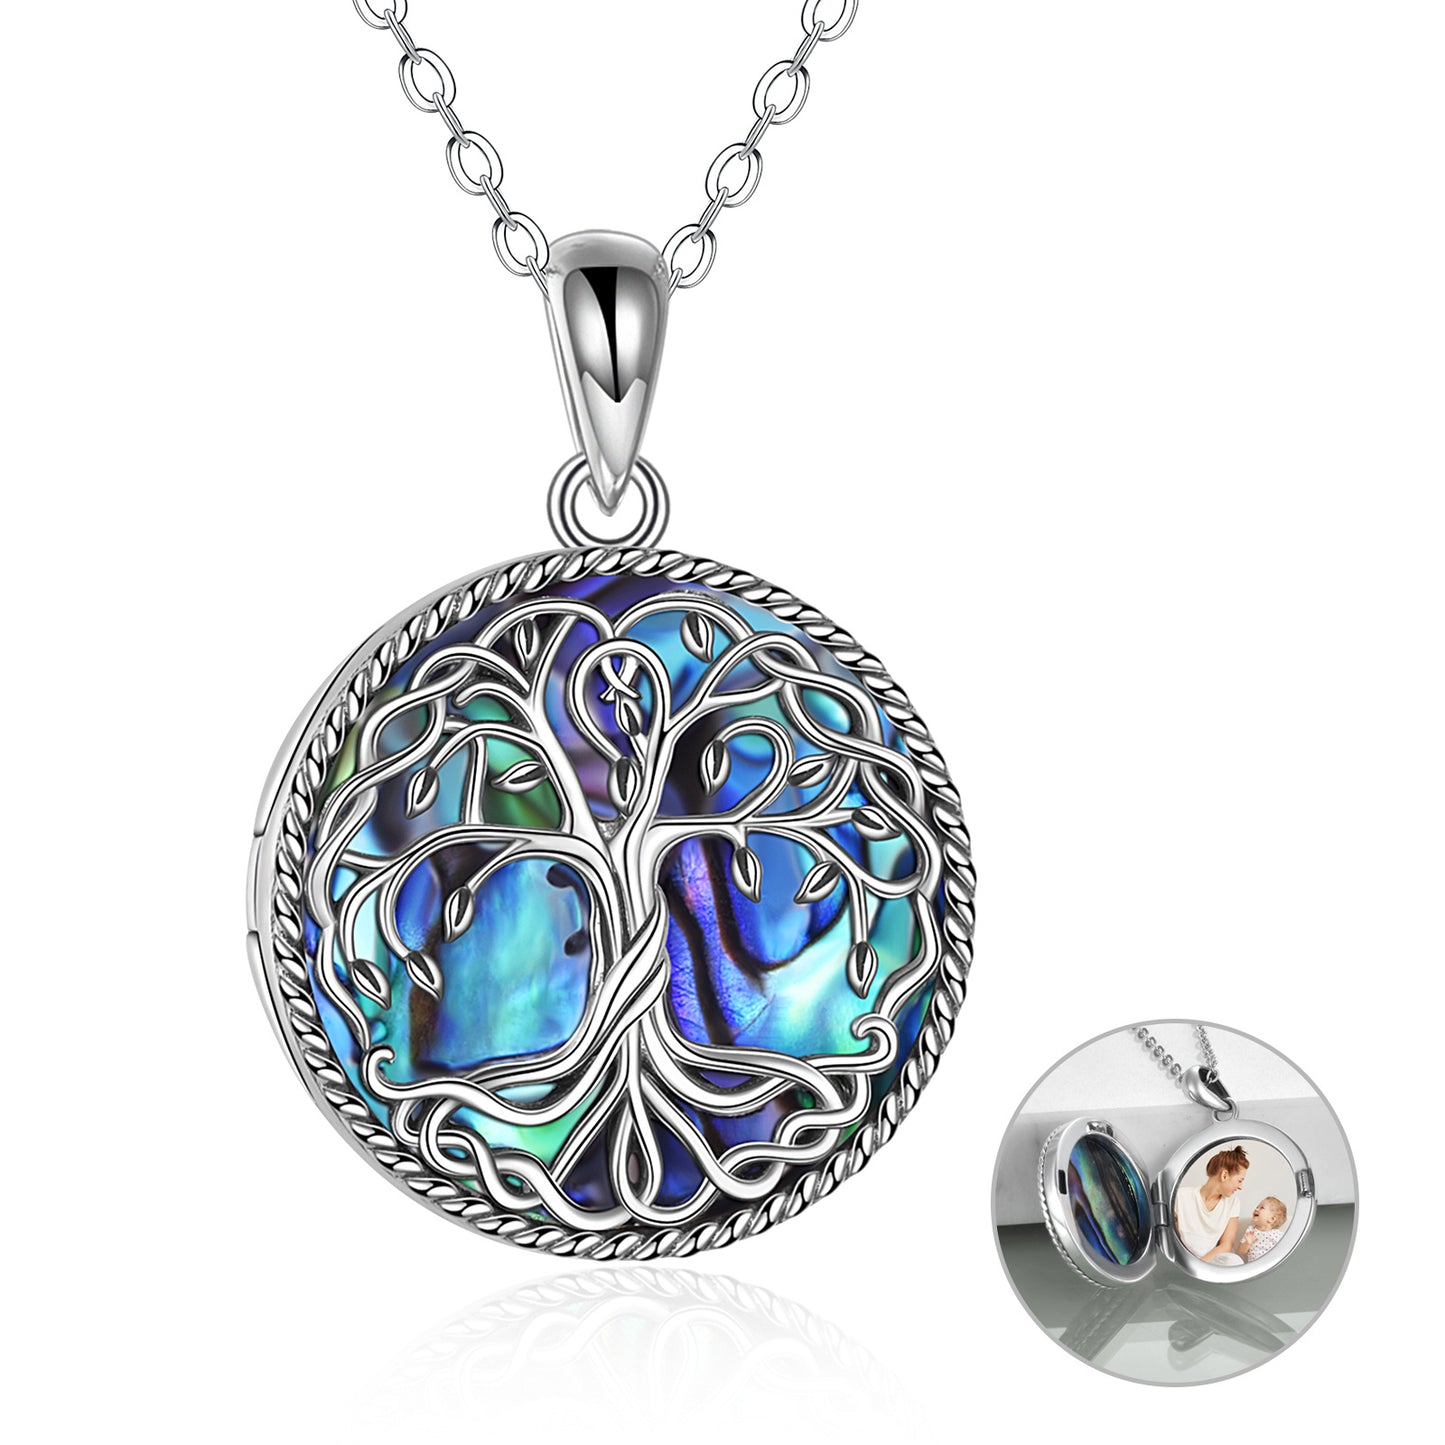 NEW YFN Tree of Life Locket Necklace Jewelry for Women Sterling Silver Celtic Family Tree Abalone Shell Lockets Jewelry Gifts for Mom Daughter